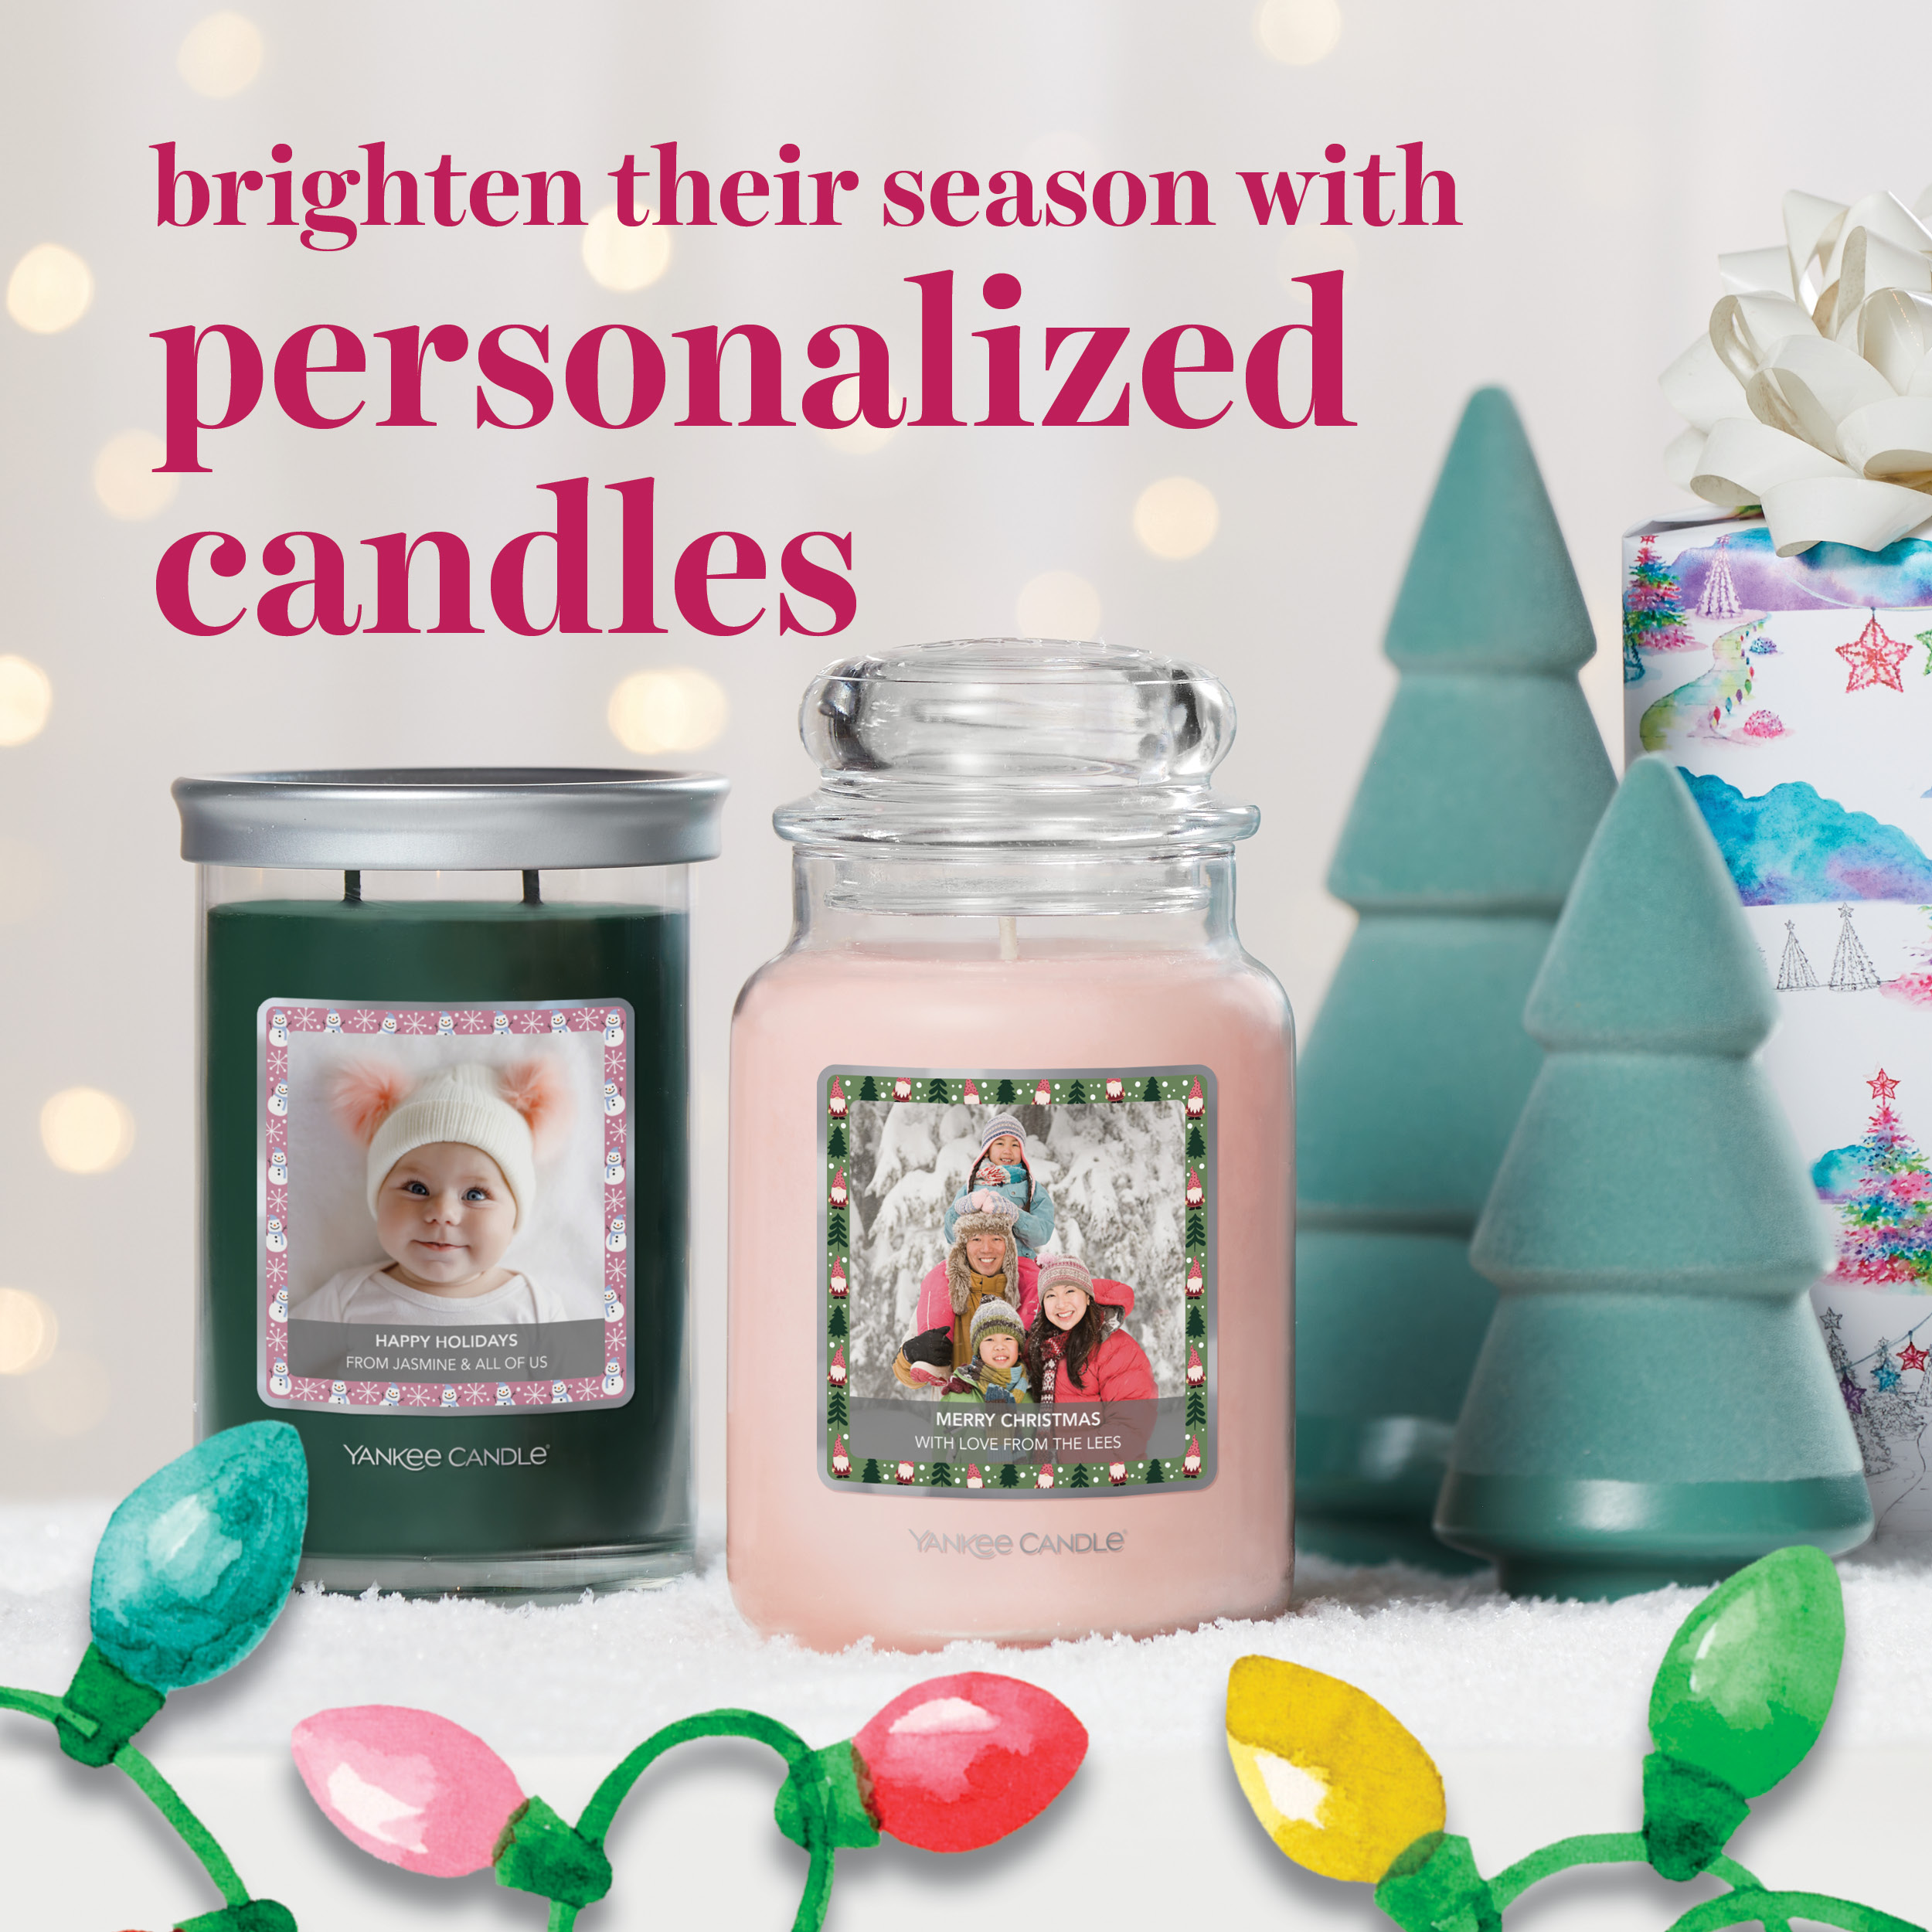 Brighten their season with Personalized Candles from Yankee Candle